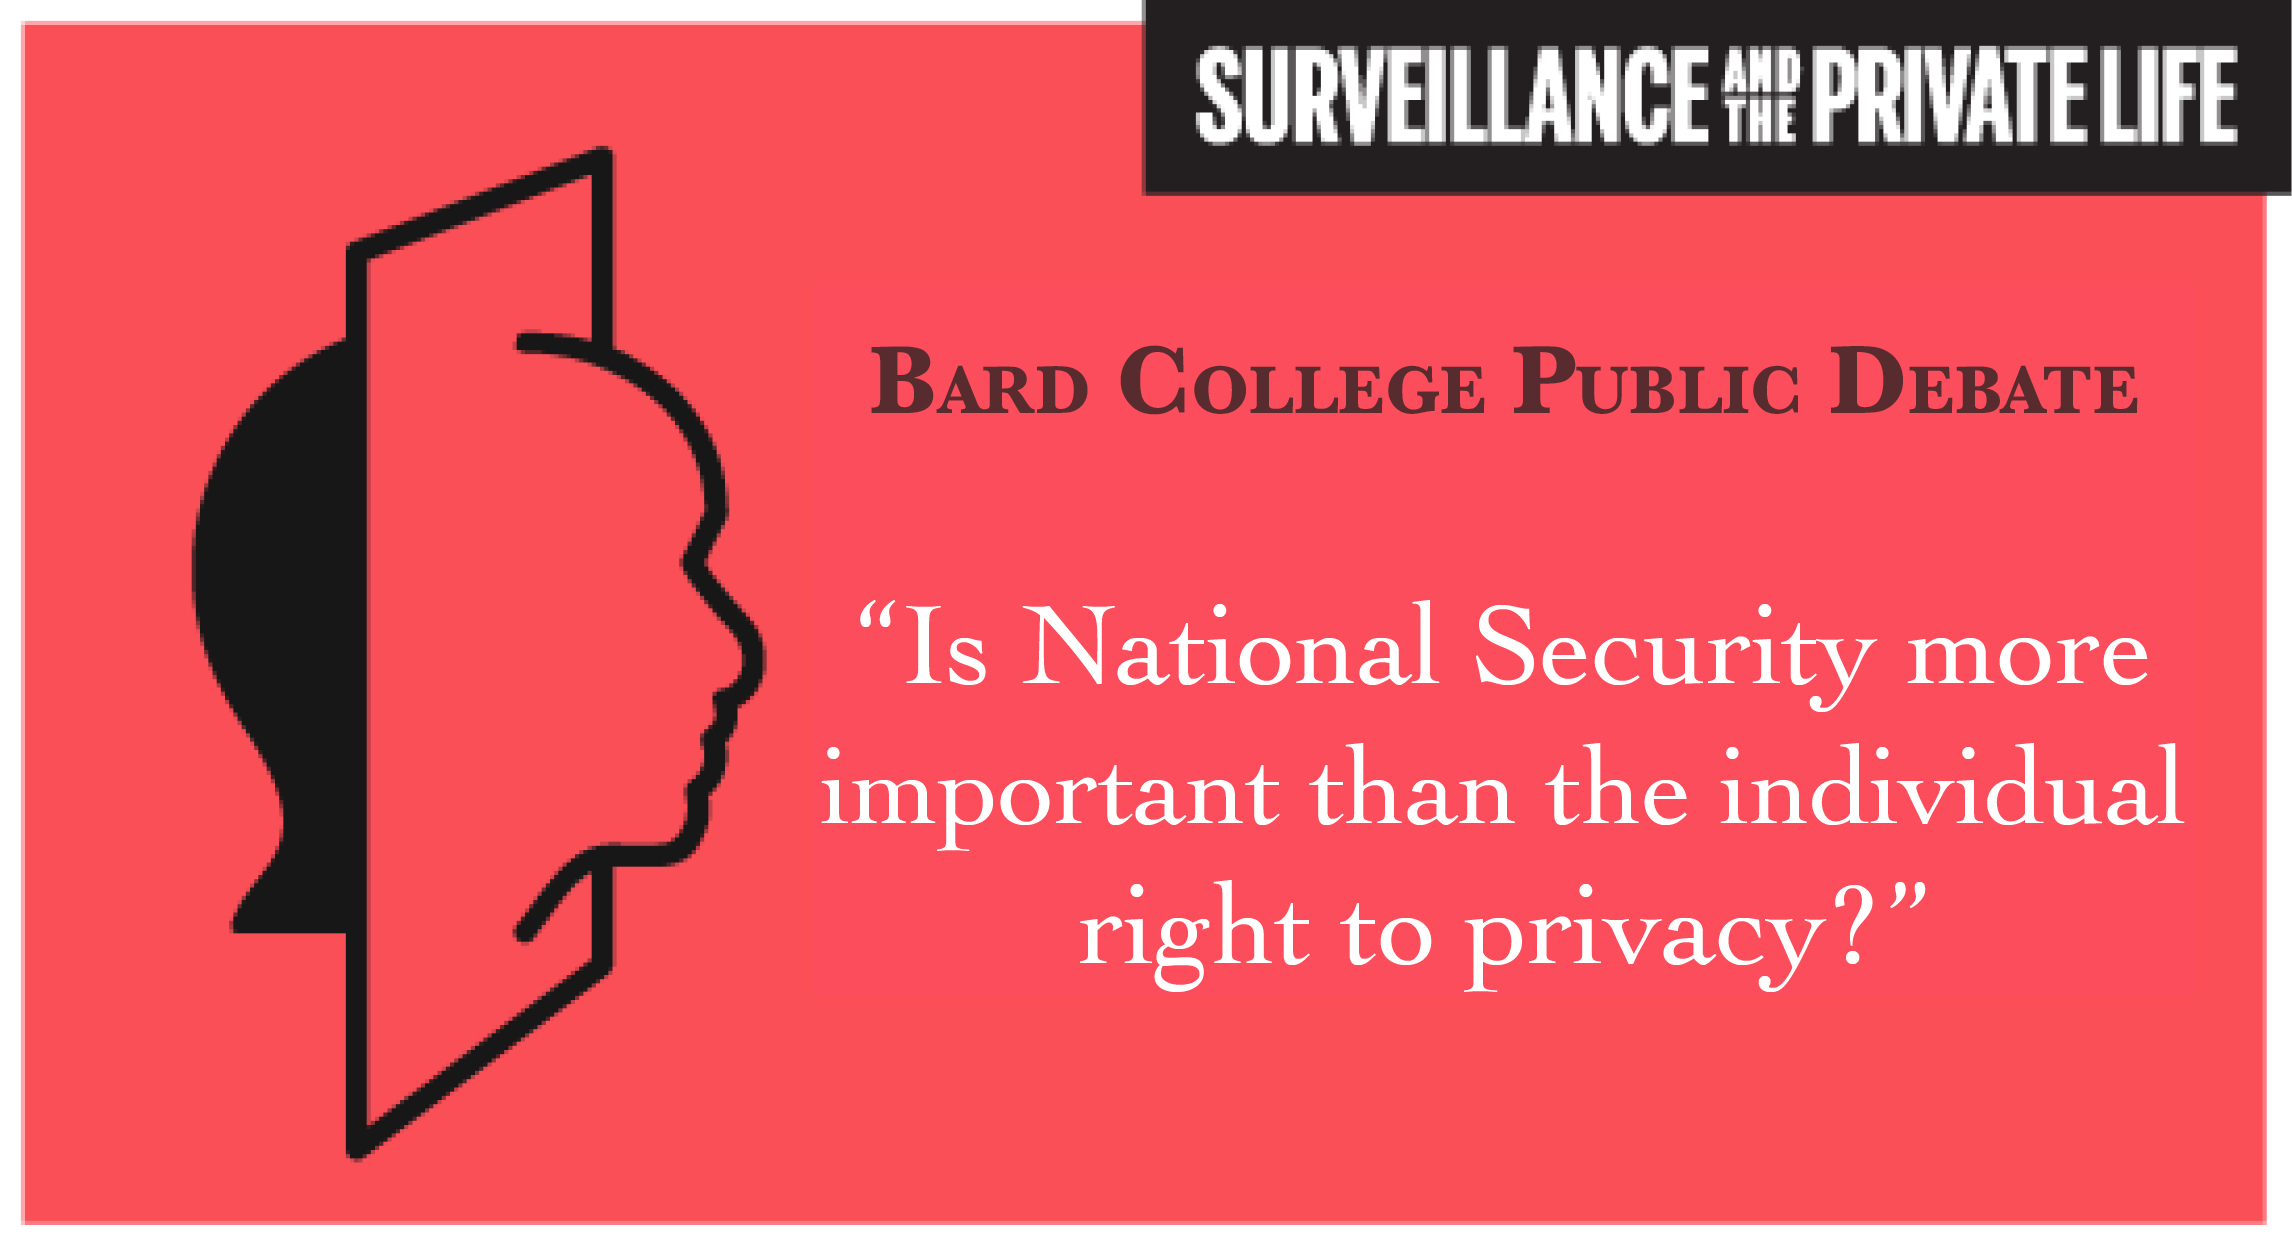 Bard College Public Debate: "Is national security more important than the individual right to privacy?"